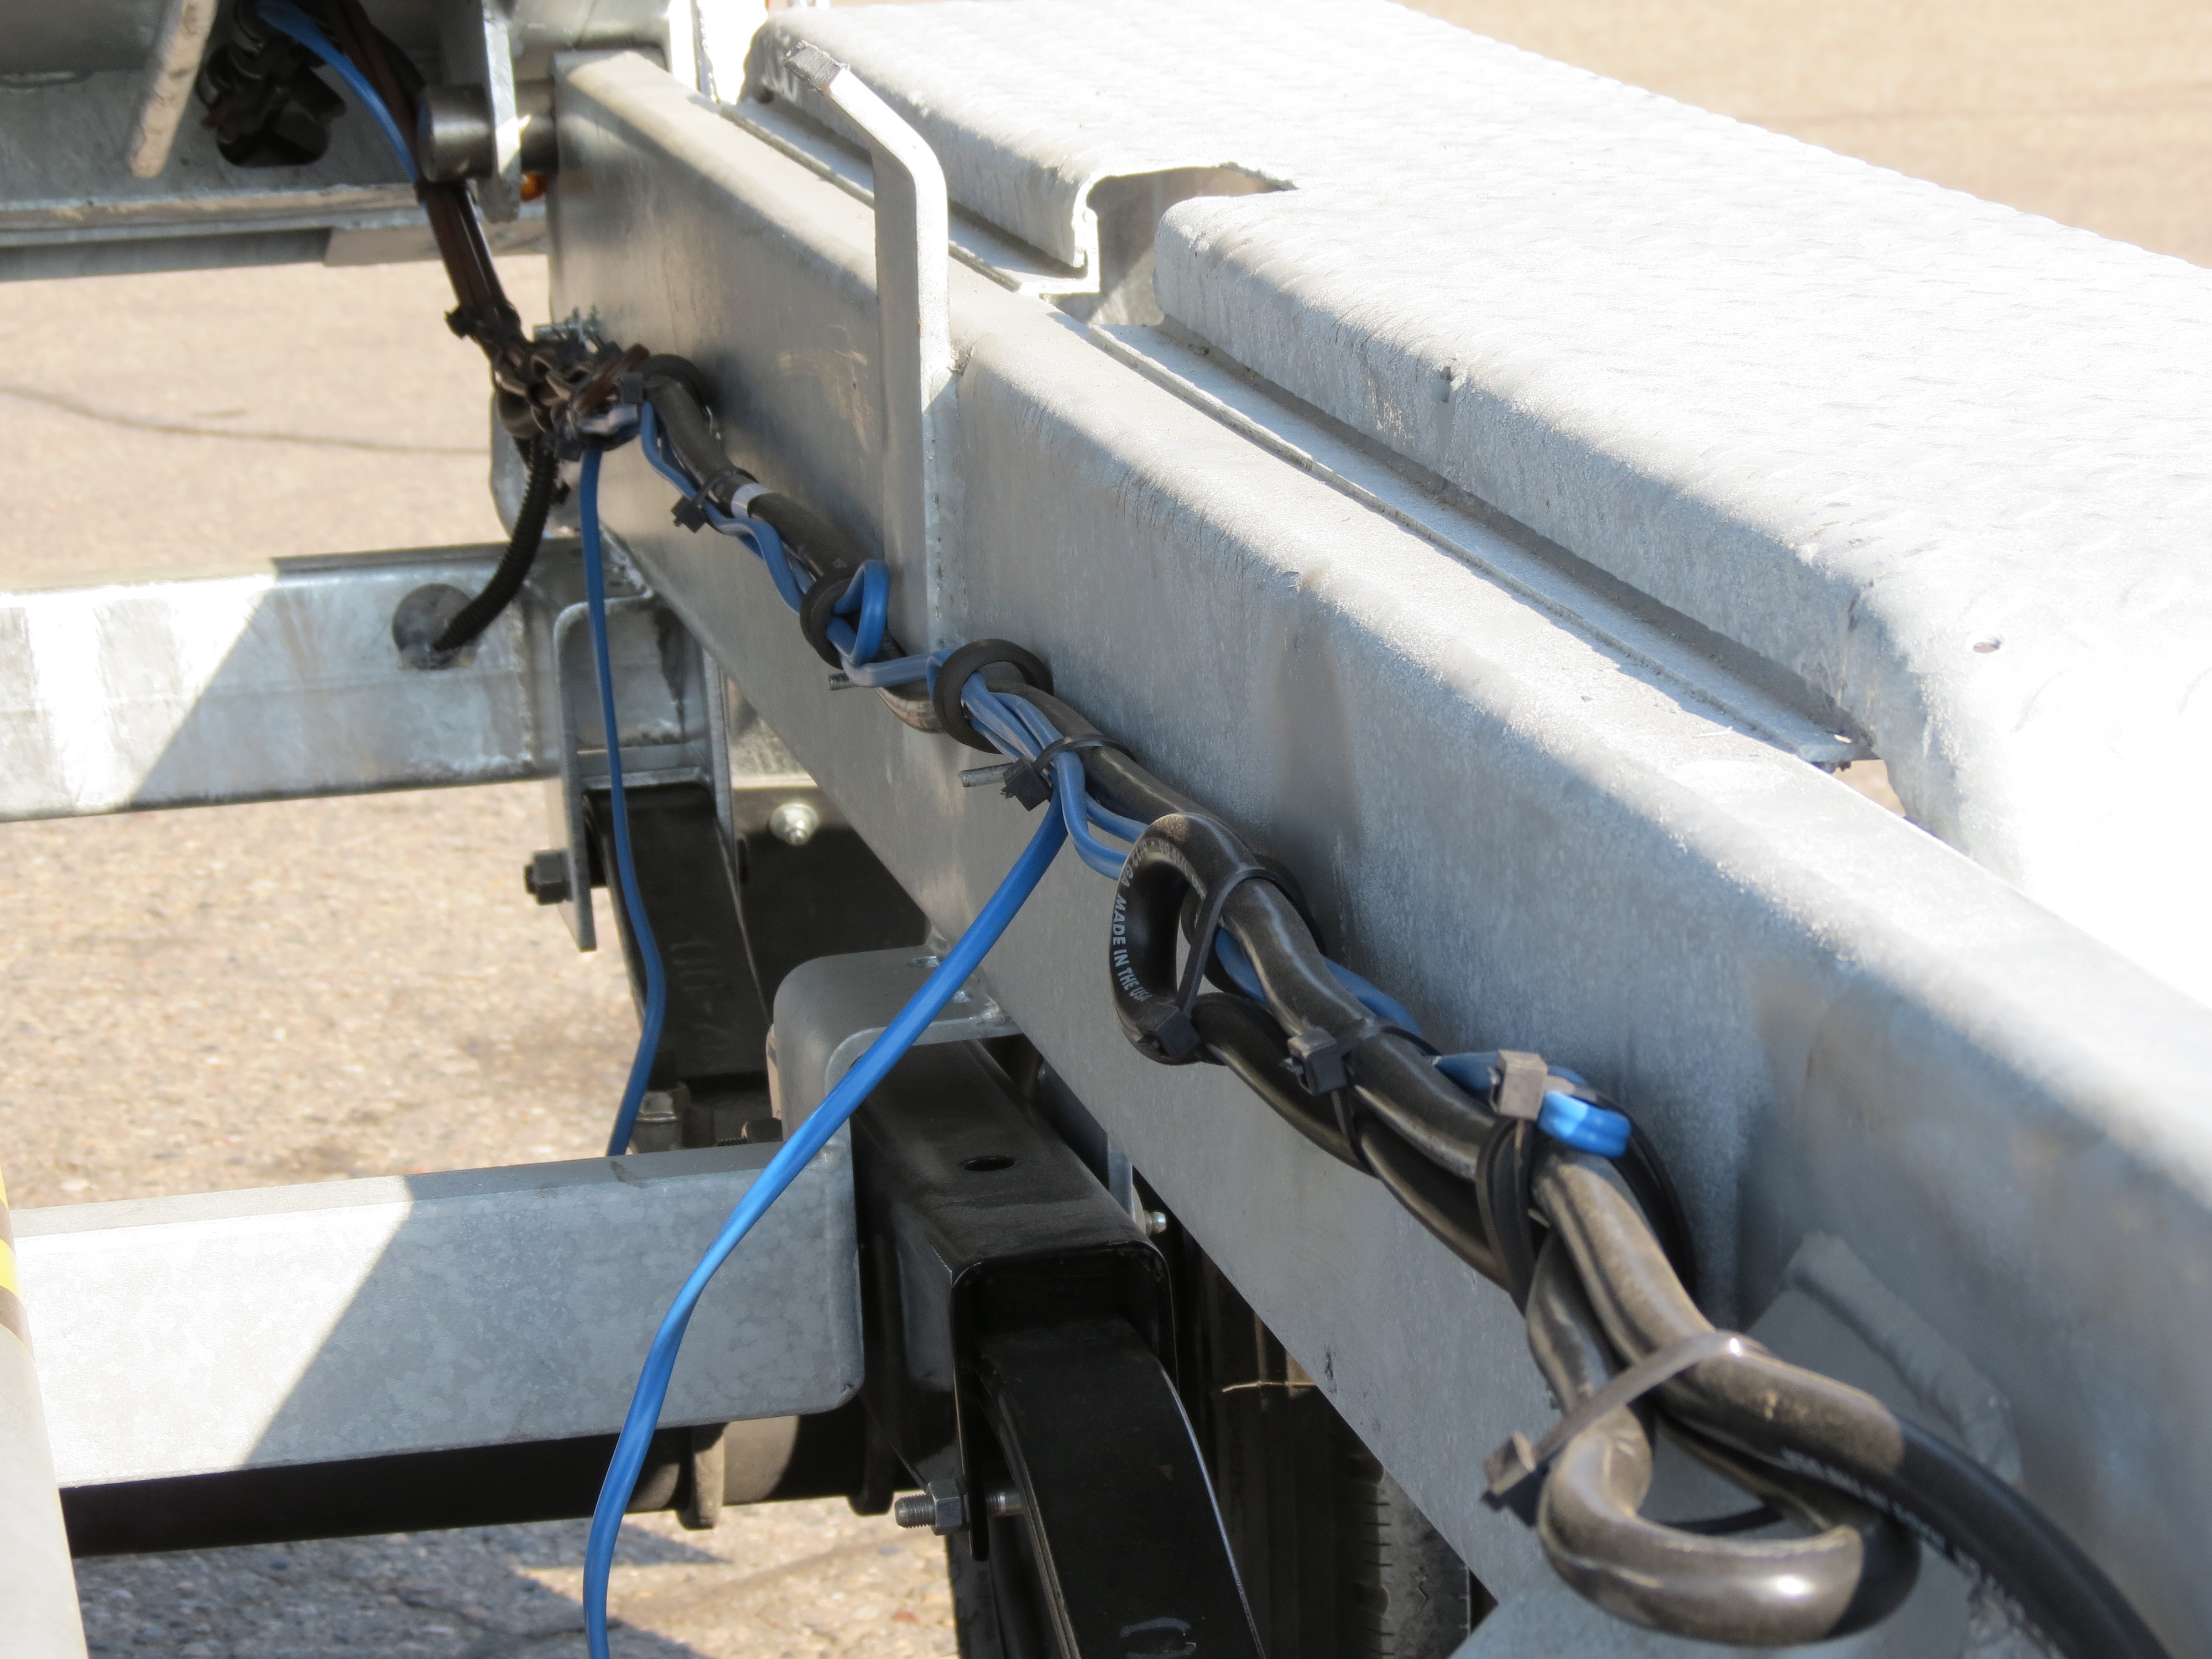 Trailer Wiring and Lighting: Troubleshooting and Maintenance